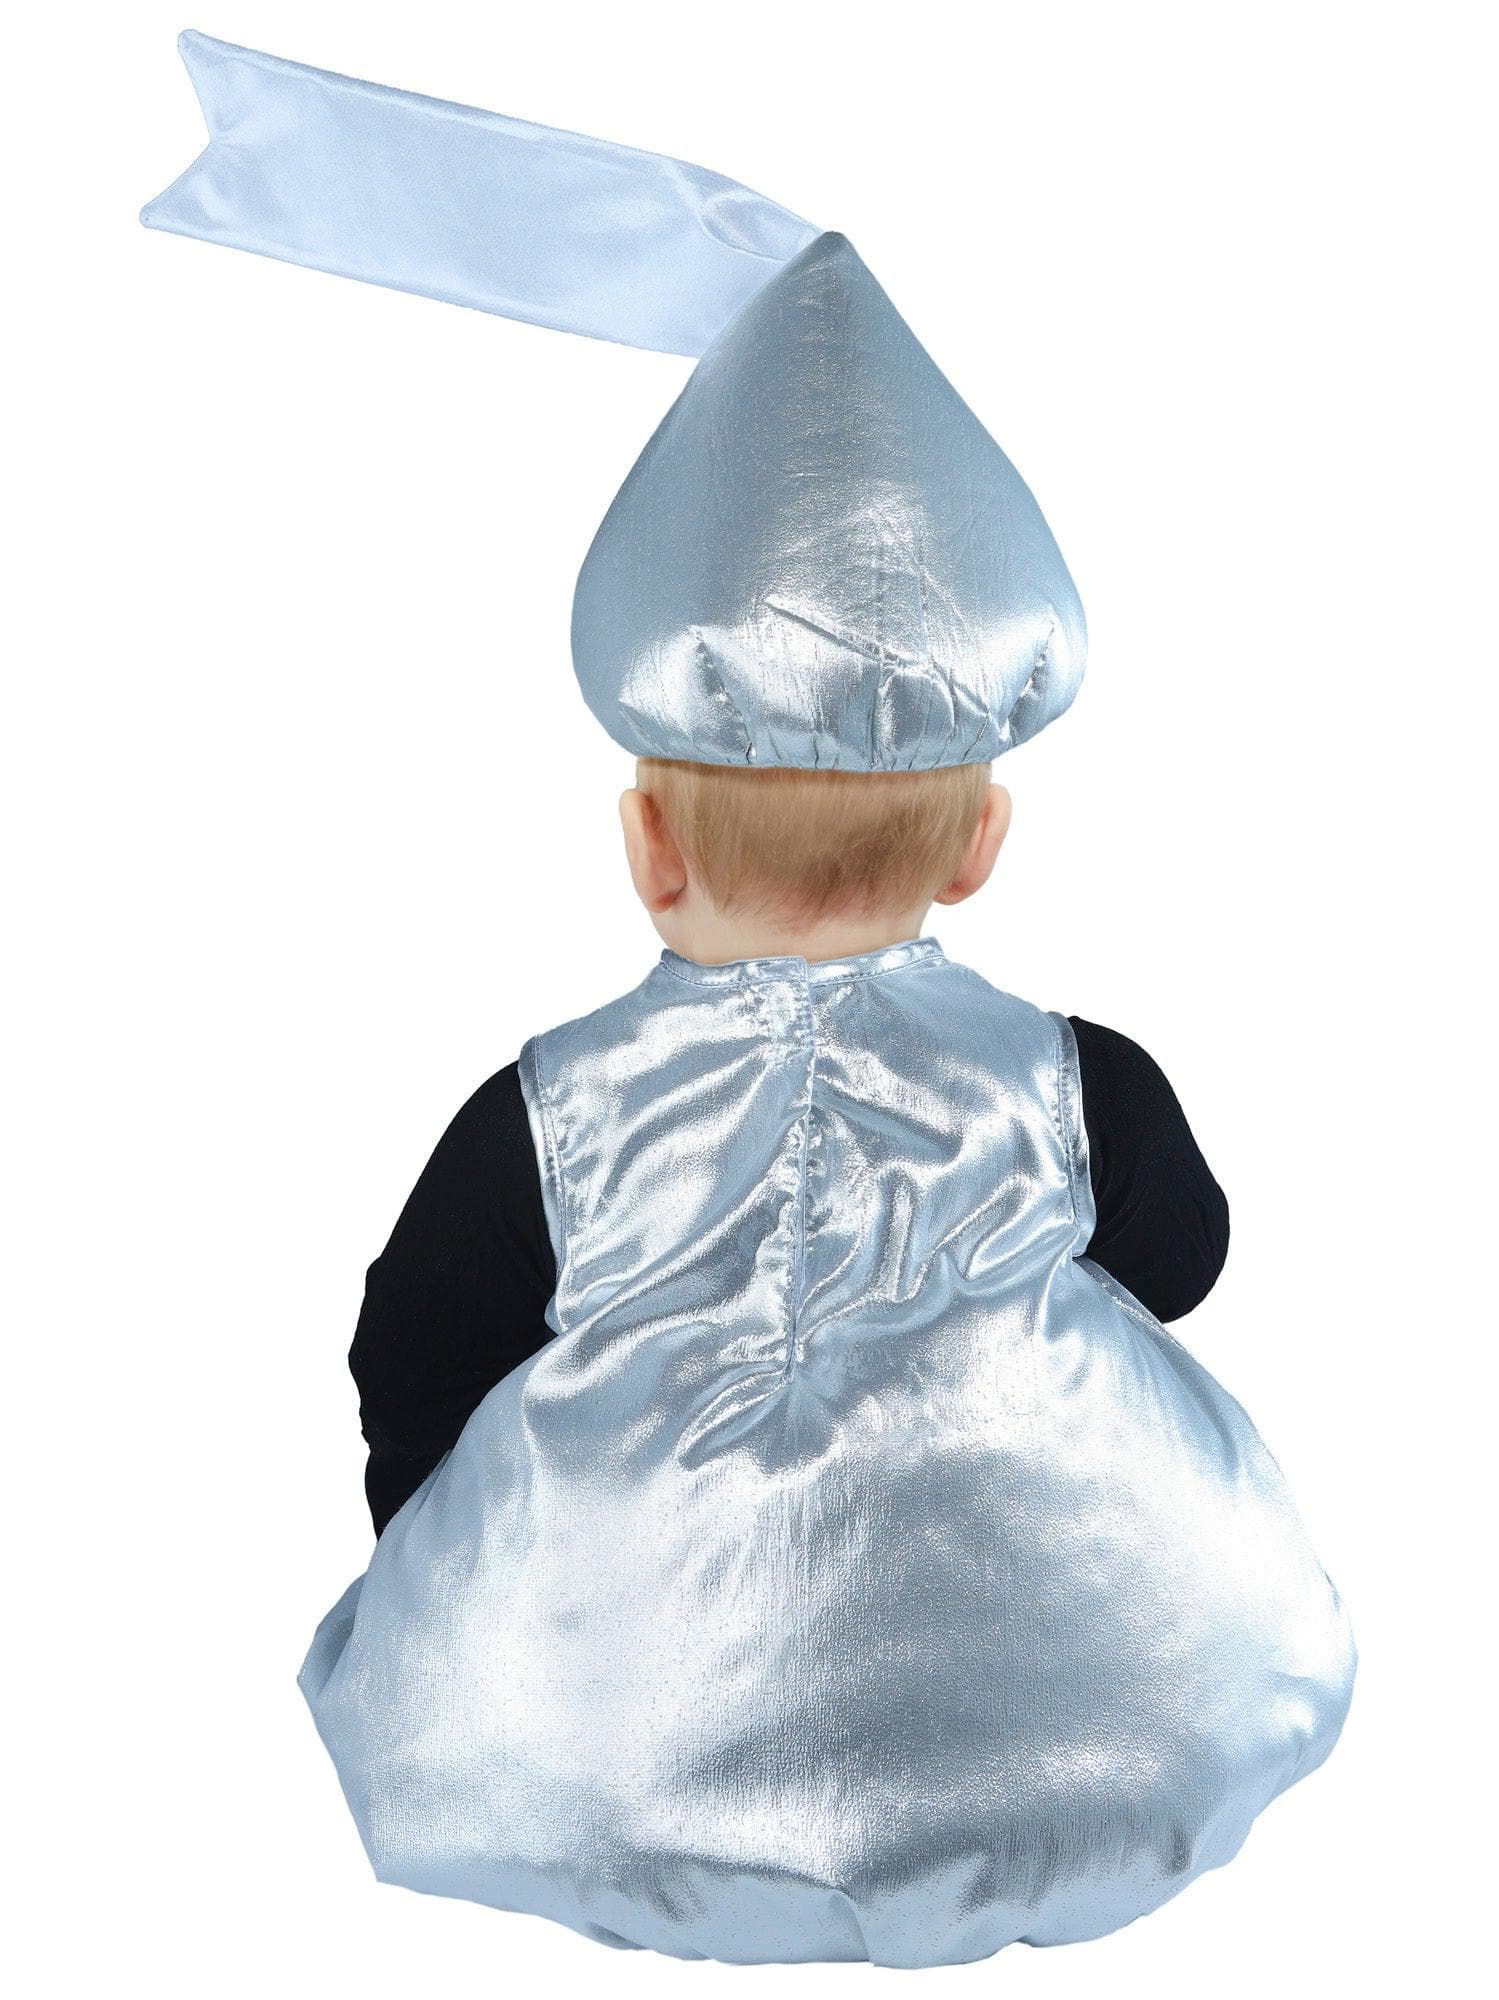 Hershey Kisses Baby/Toddler Costume - costumes.com